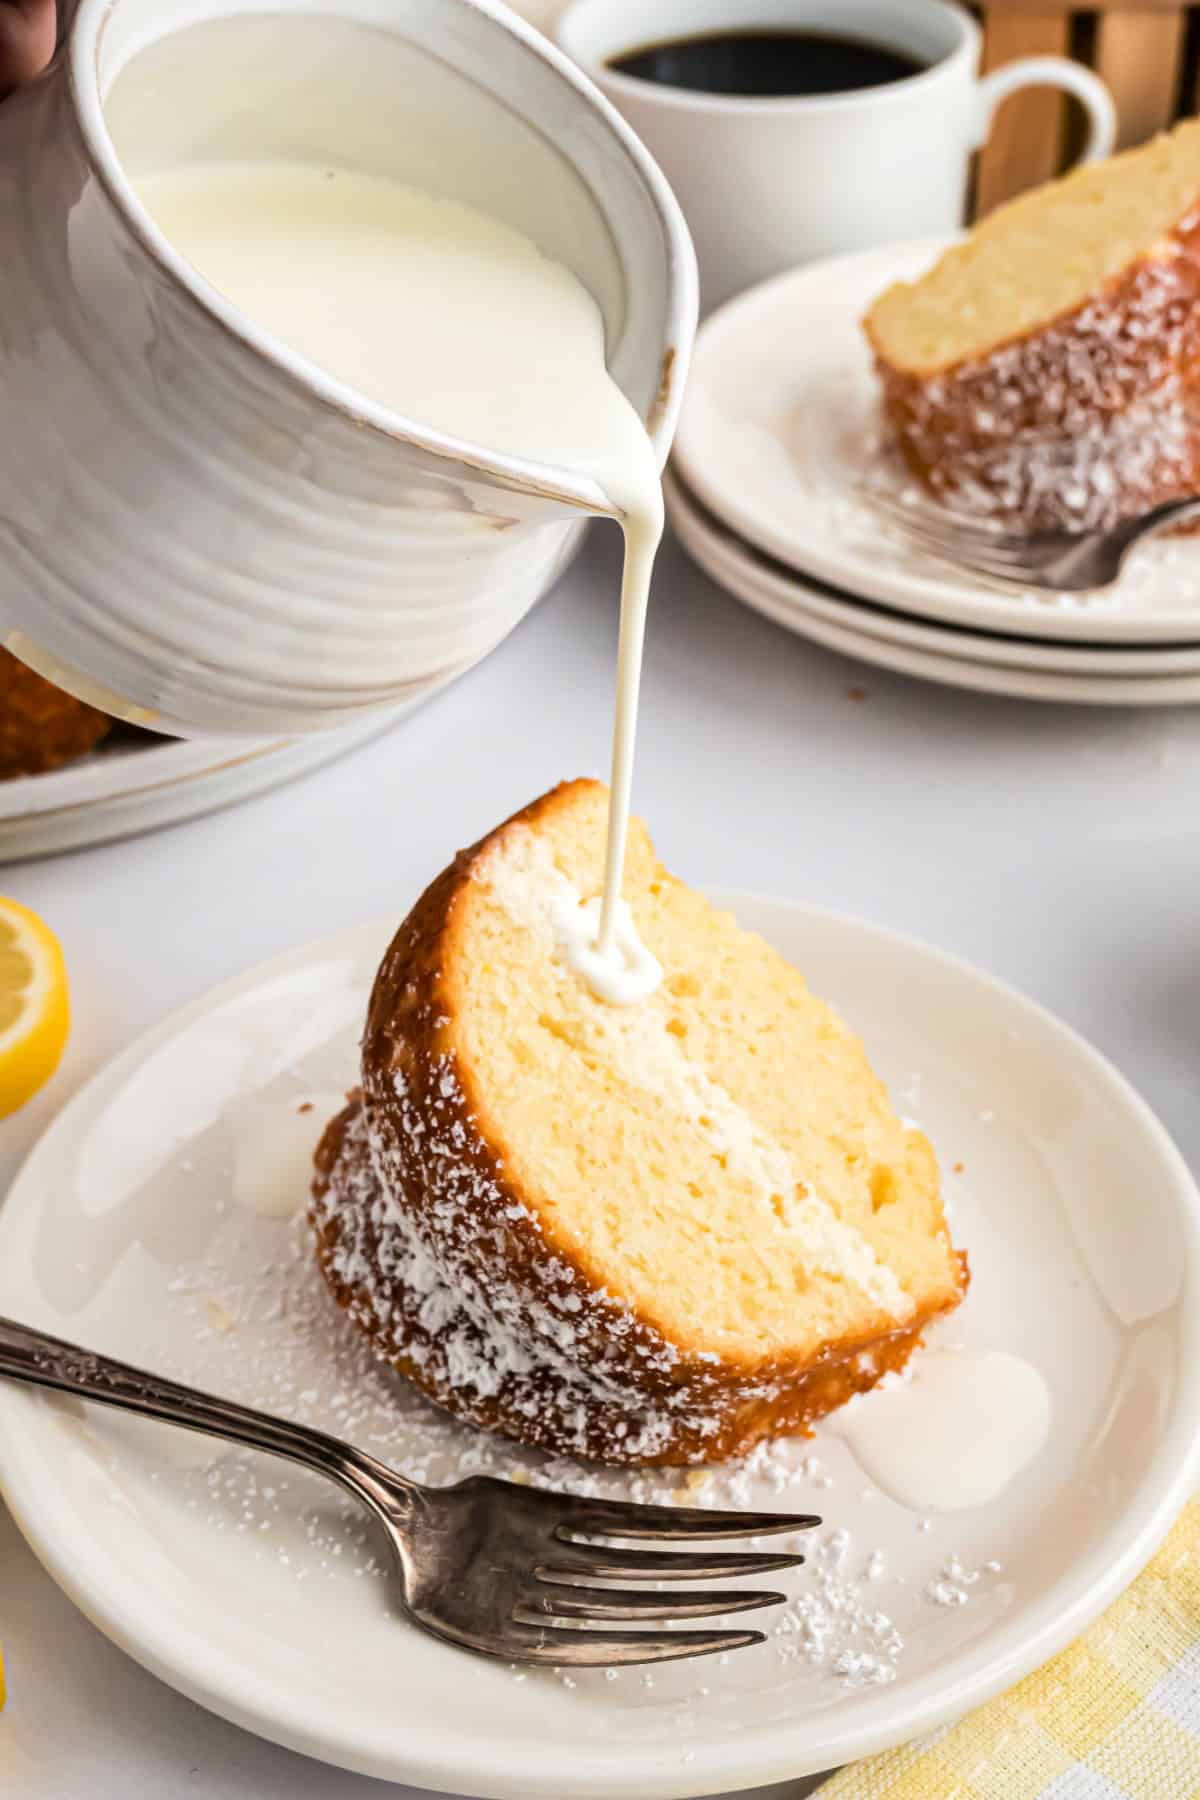 Cream being poured over a slice of lemon cake.